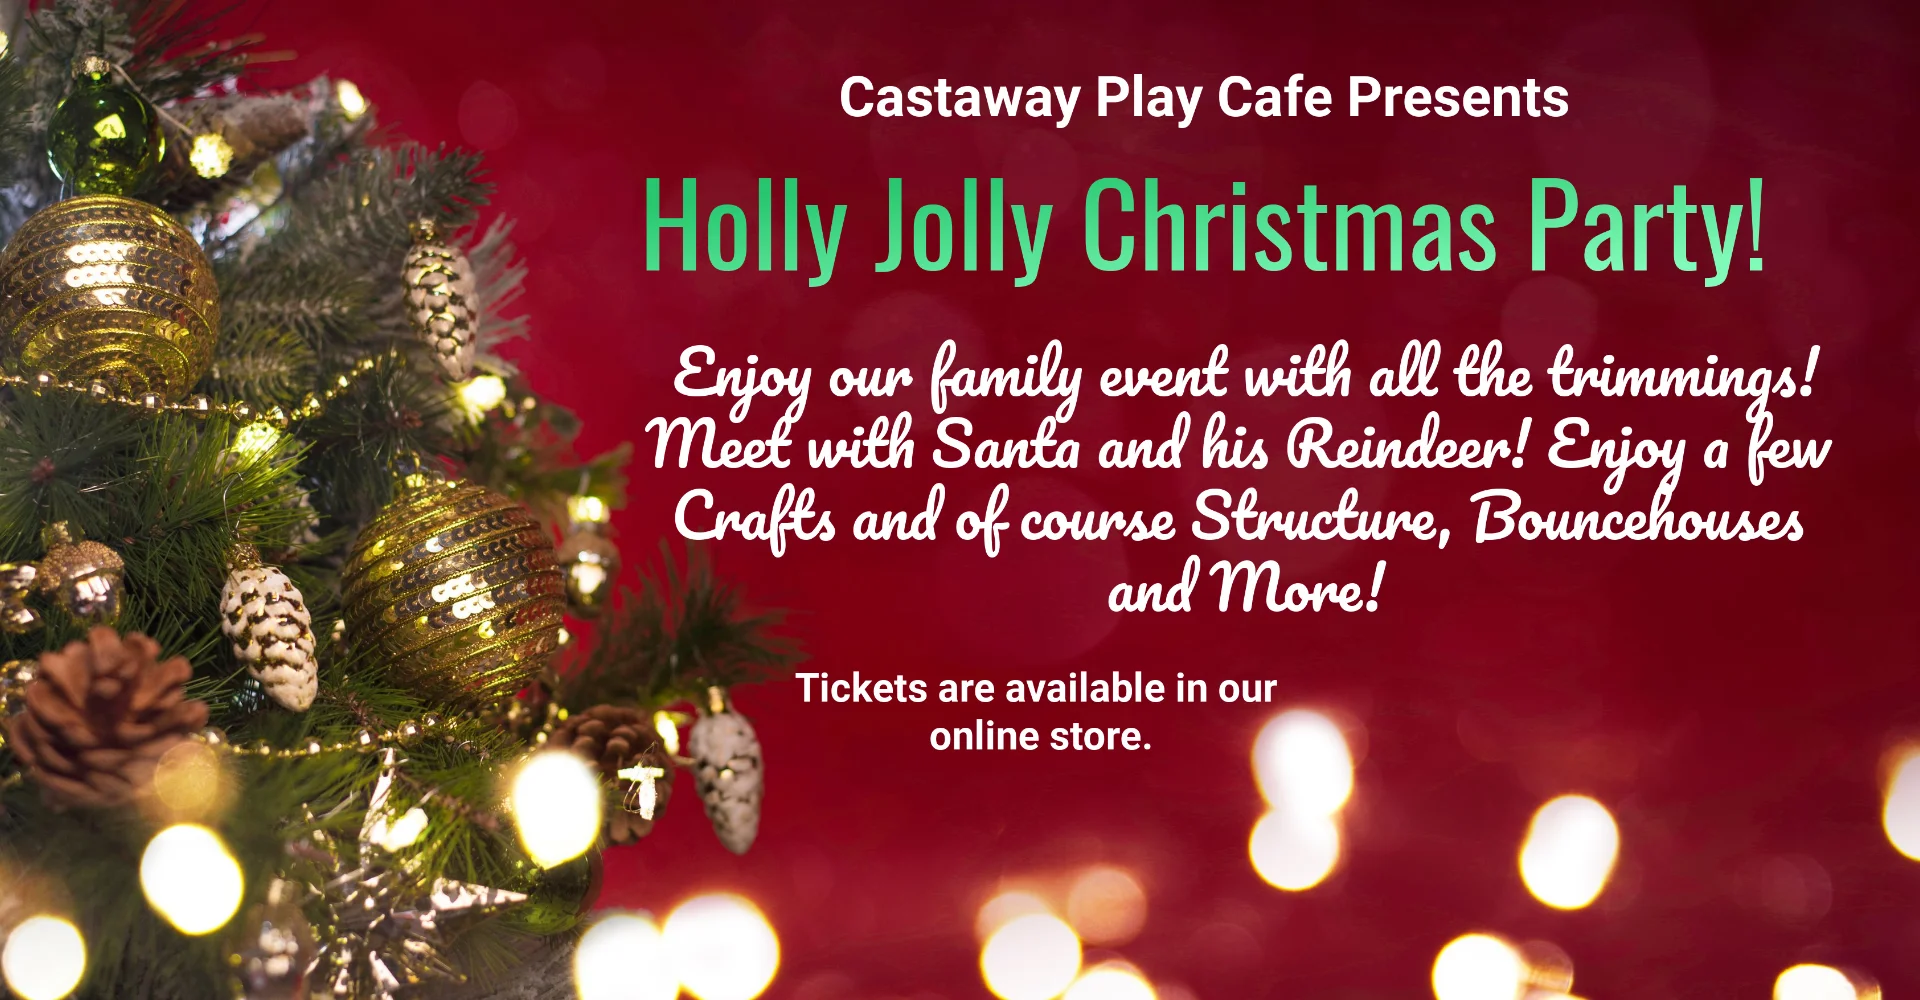 Castaway Play Cafe Christmas Party 2022